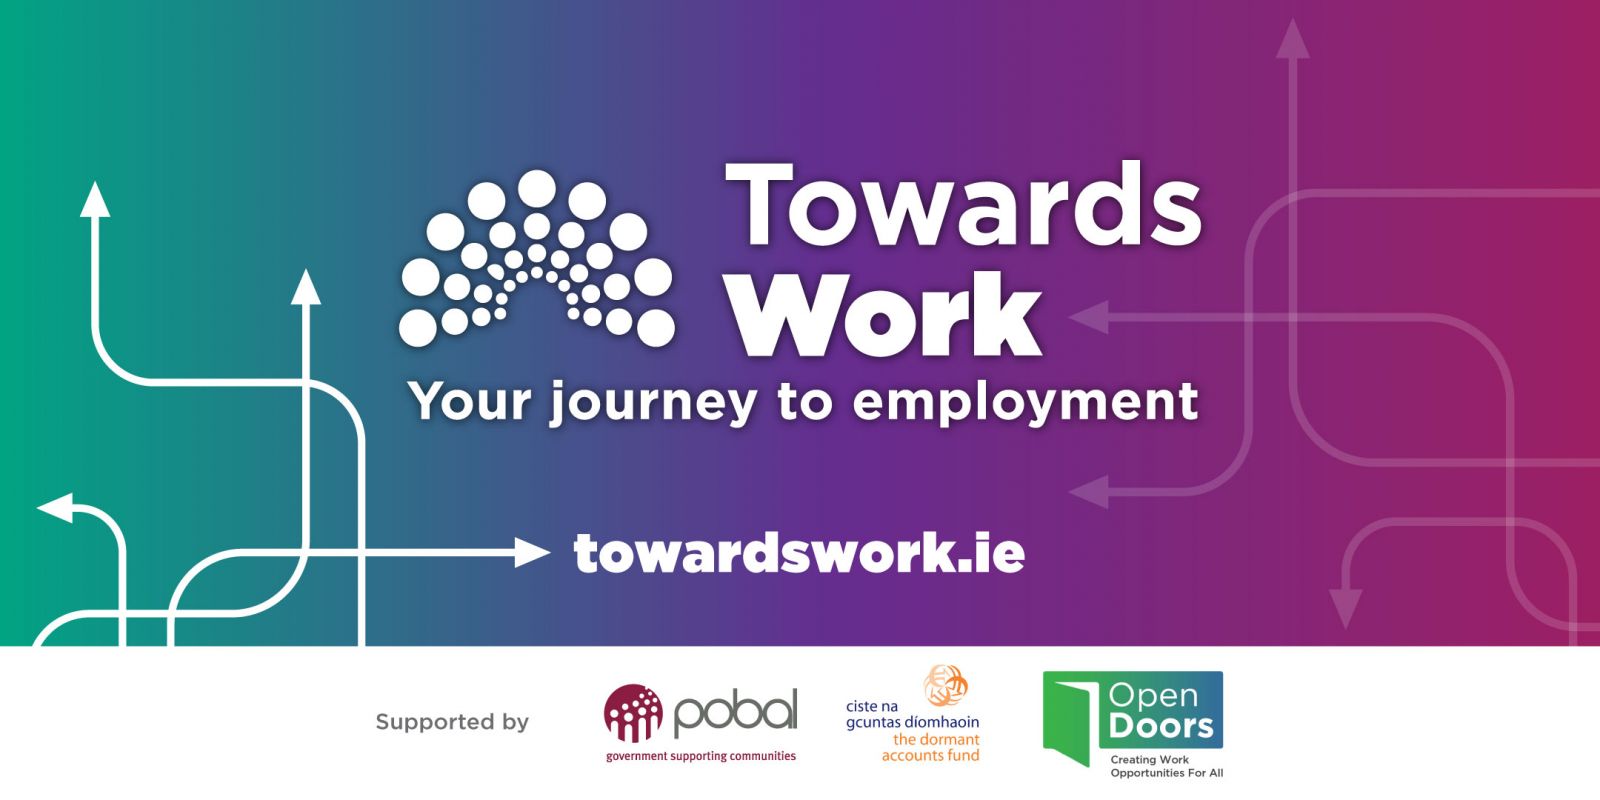 Towards Work - Your journey to employment. www.towardswork.ie supported by Pobal, Dormant Accounts Fund, Open Doors Initiative